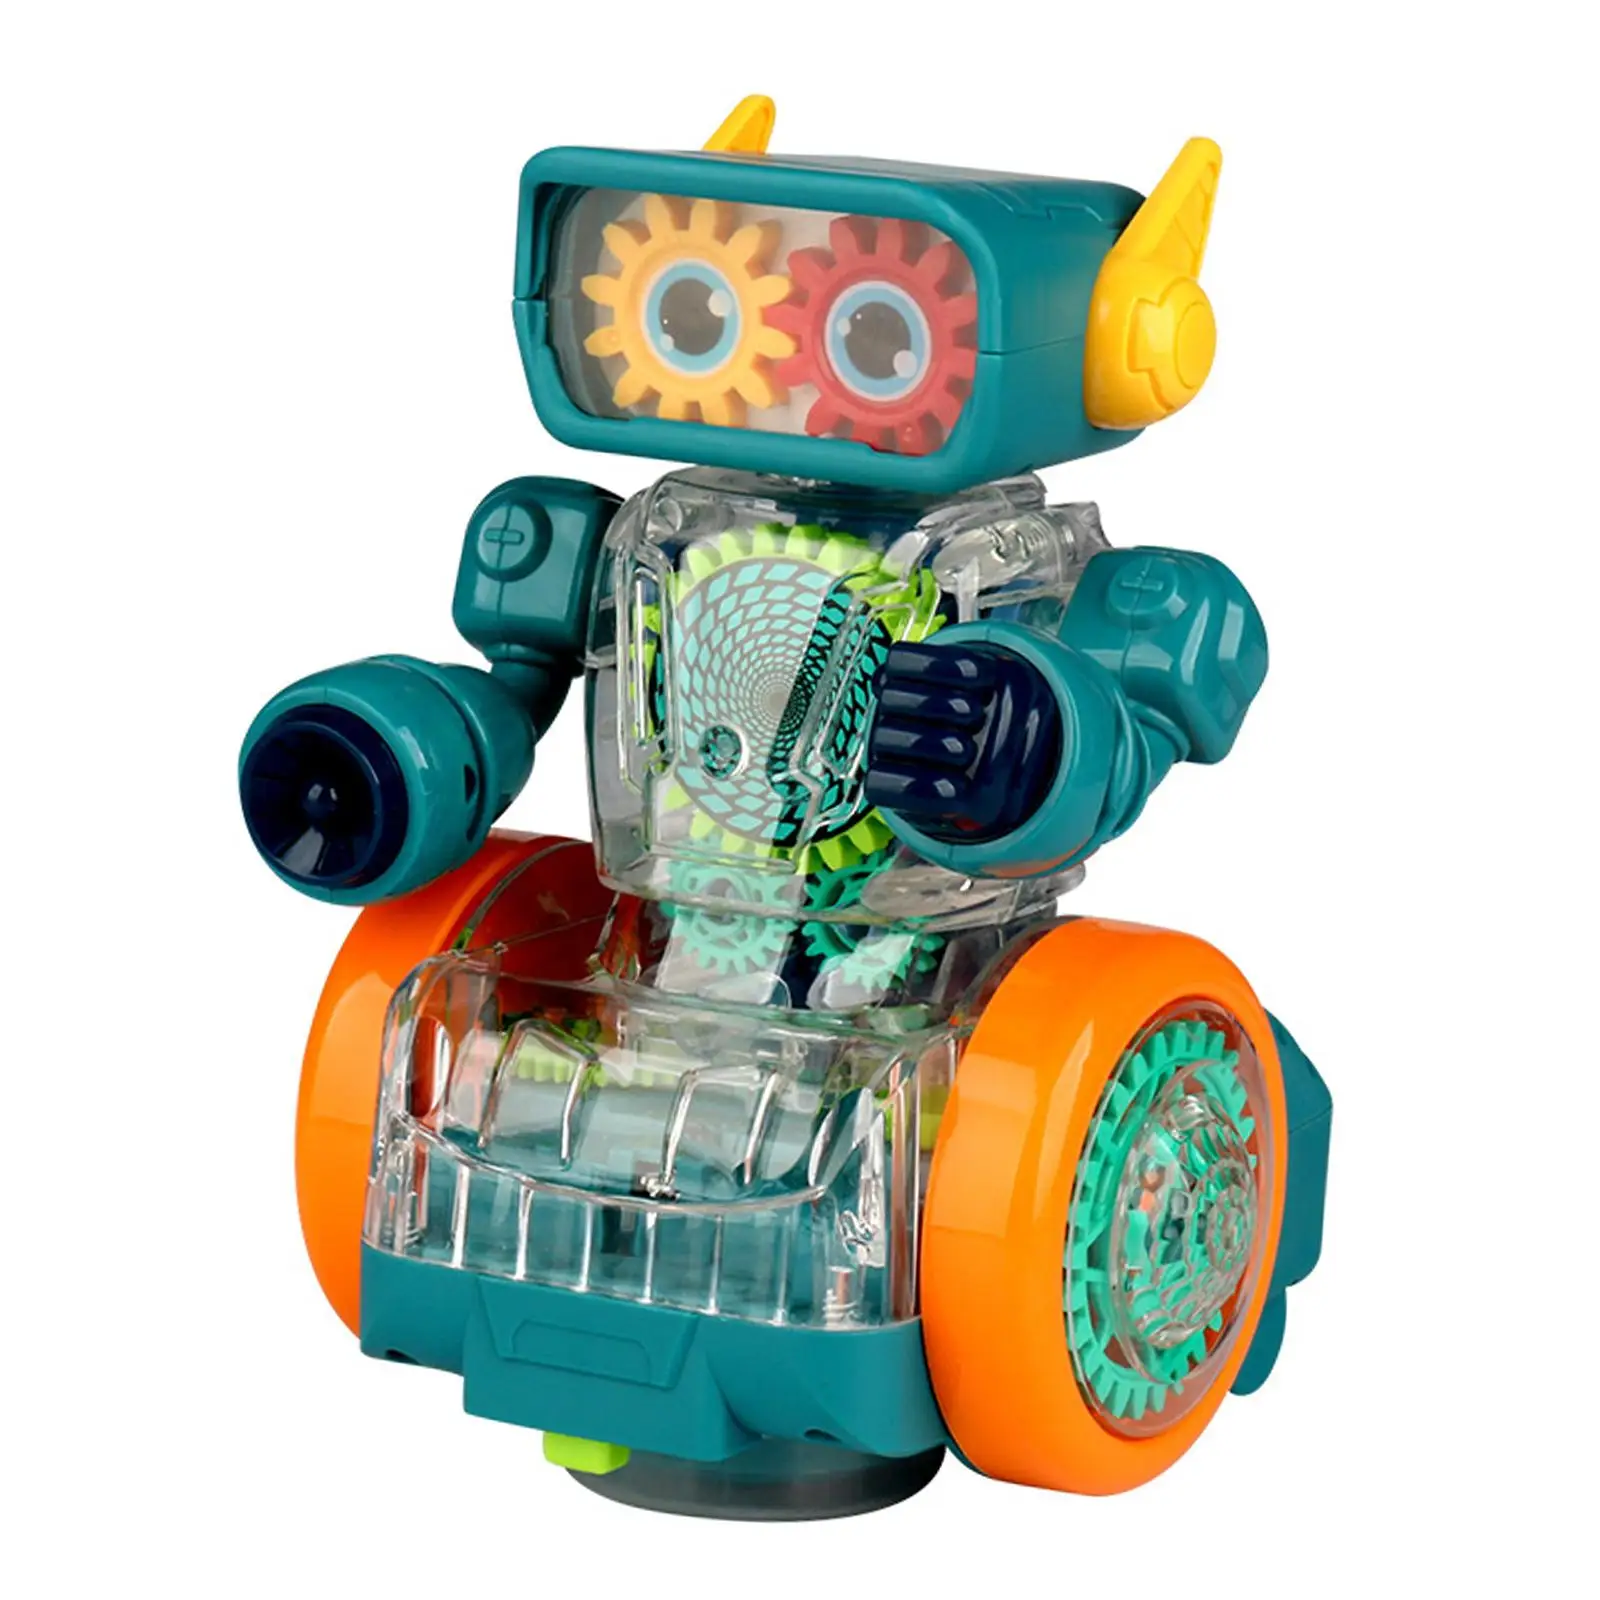 Mechanical Gear Robot Toy with Visible Moving Gears for Girls Birthday Gifts